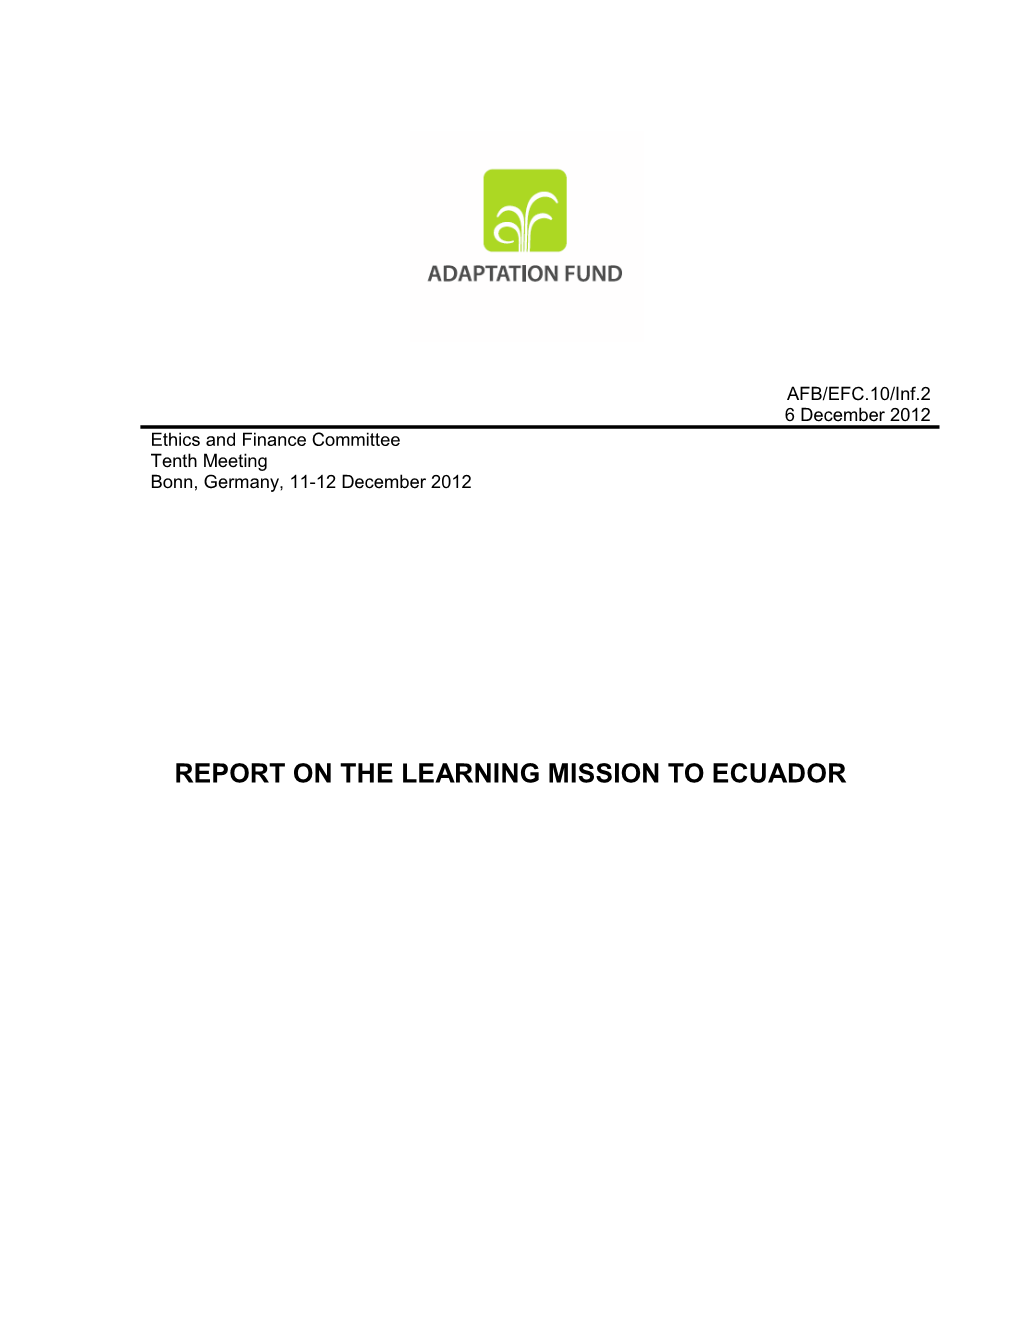 Report on the Learning Mission to Funded Project in Ecuador